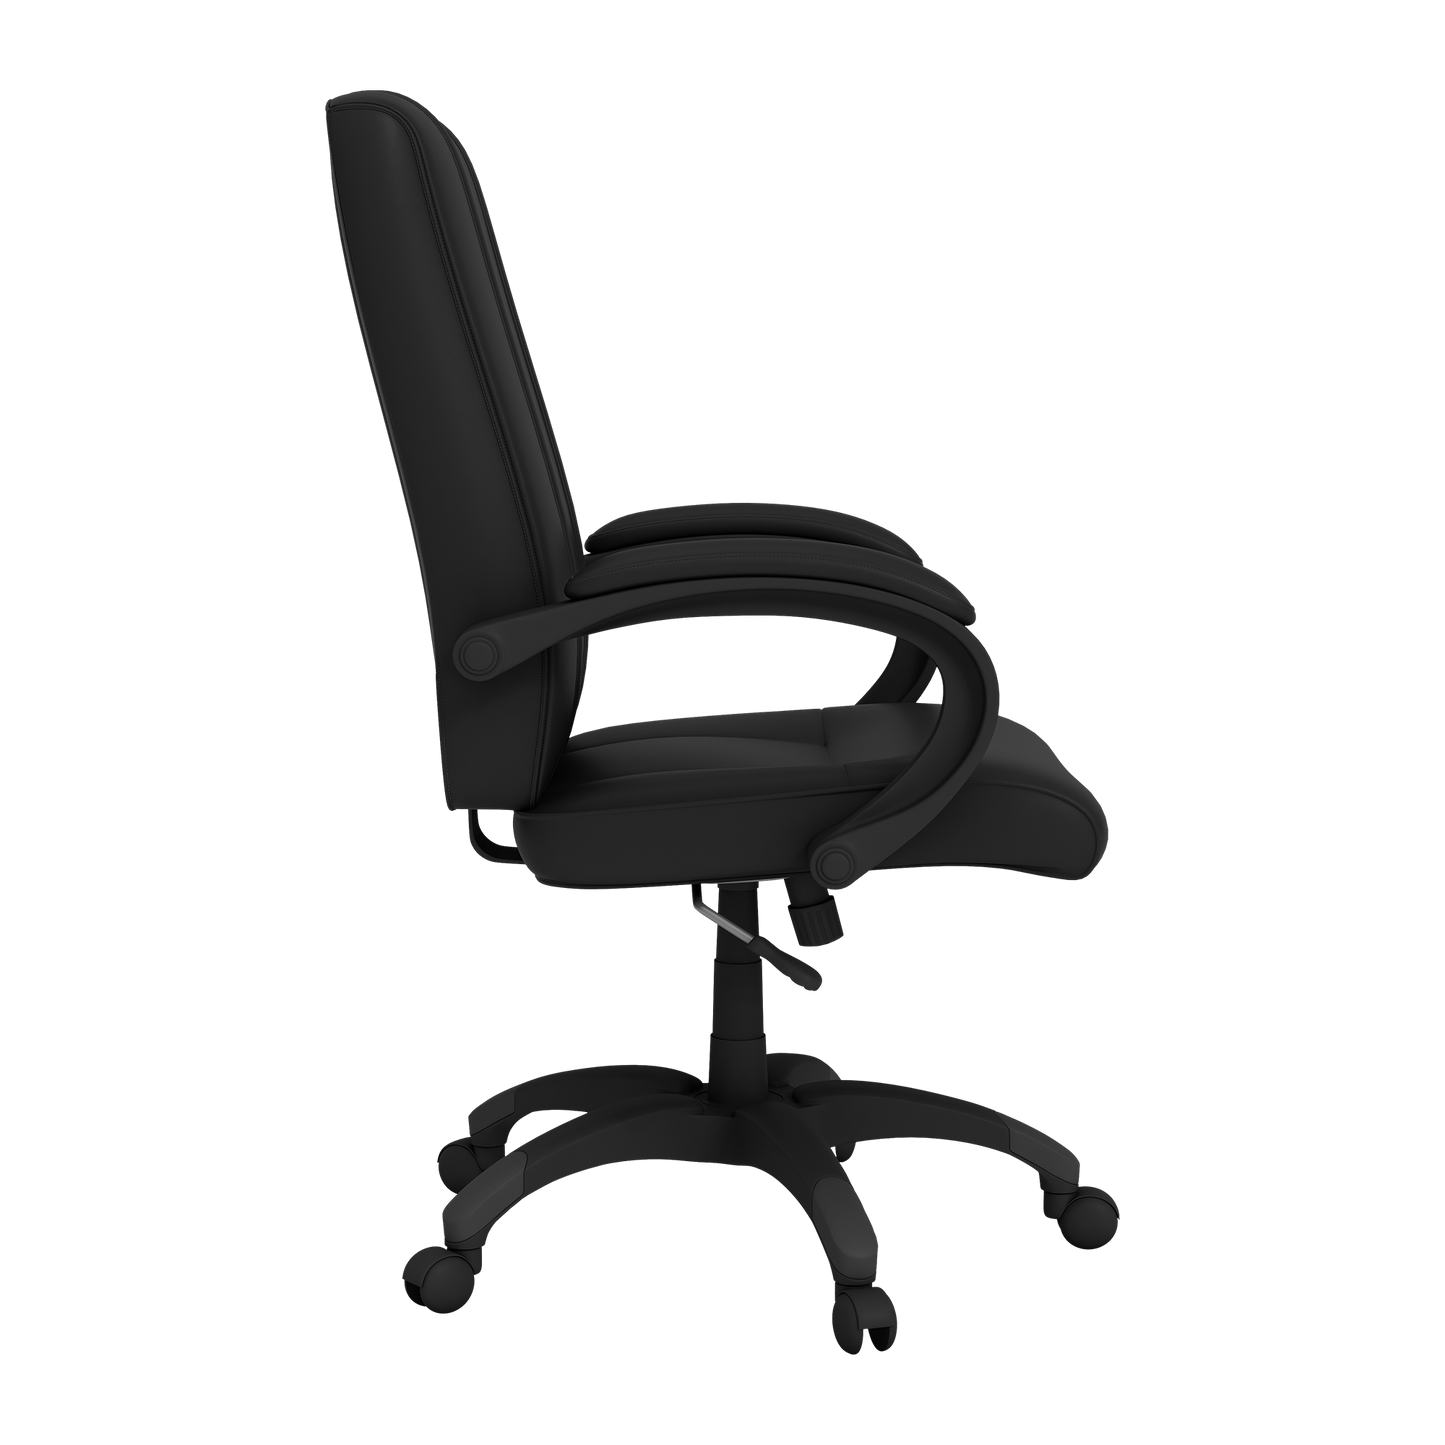 Office Chair 1000 with Beagle Logo Panel